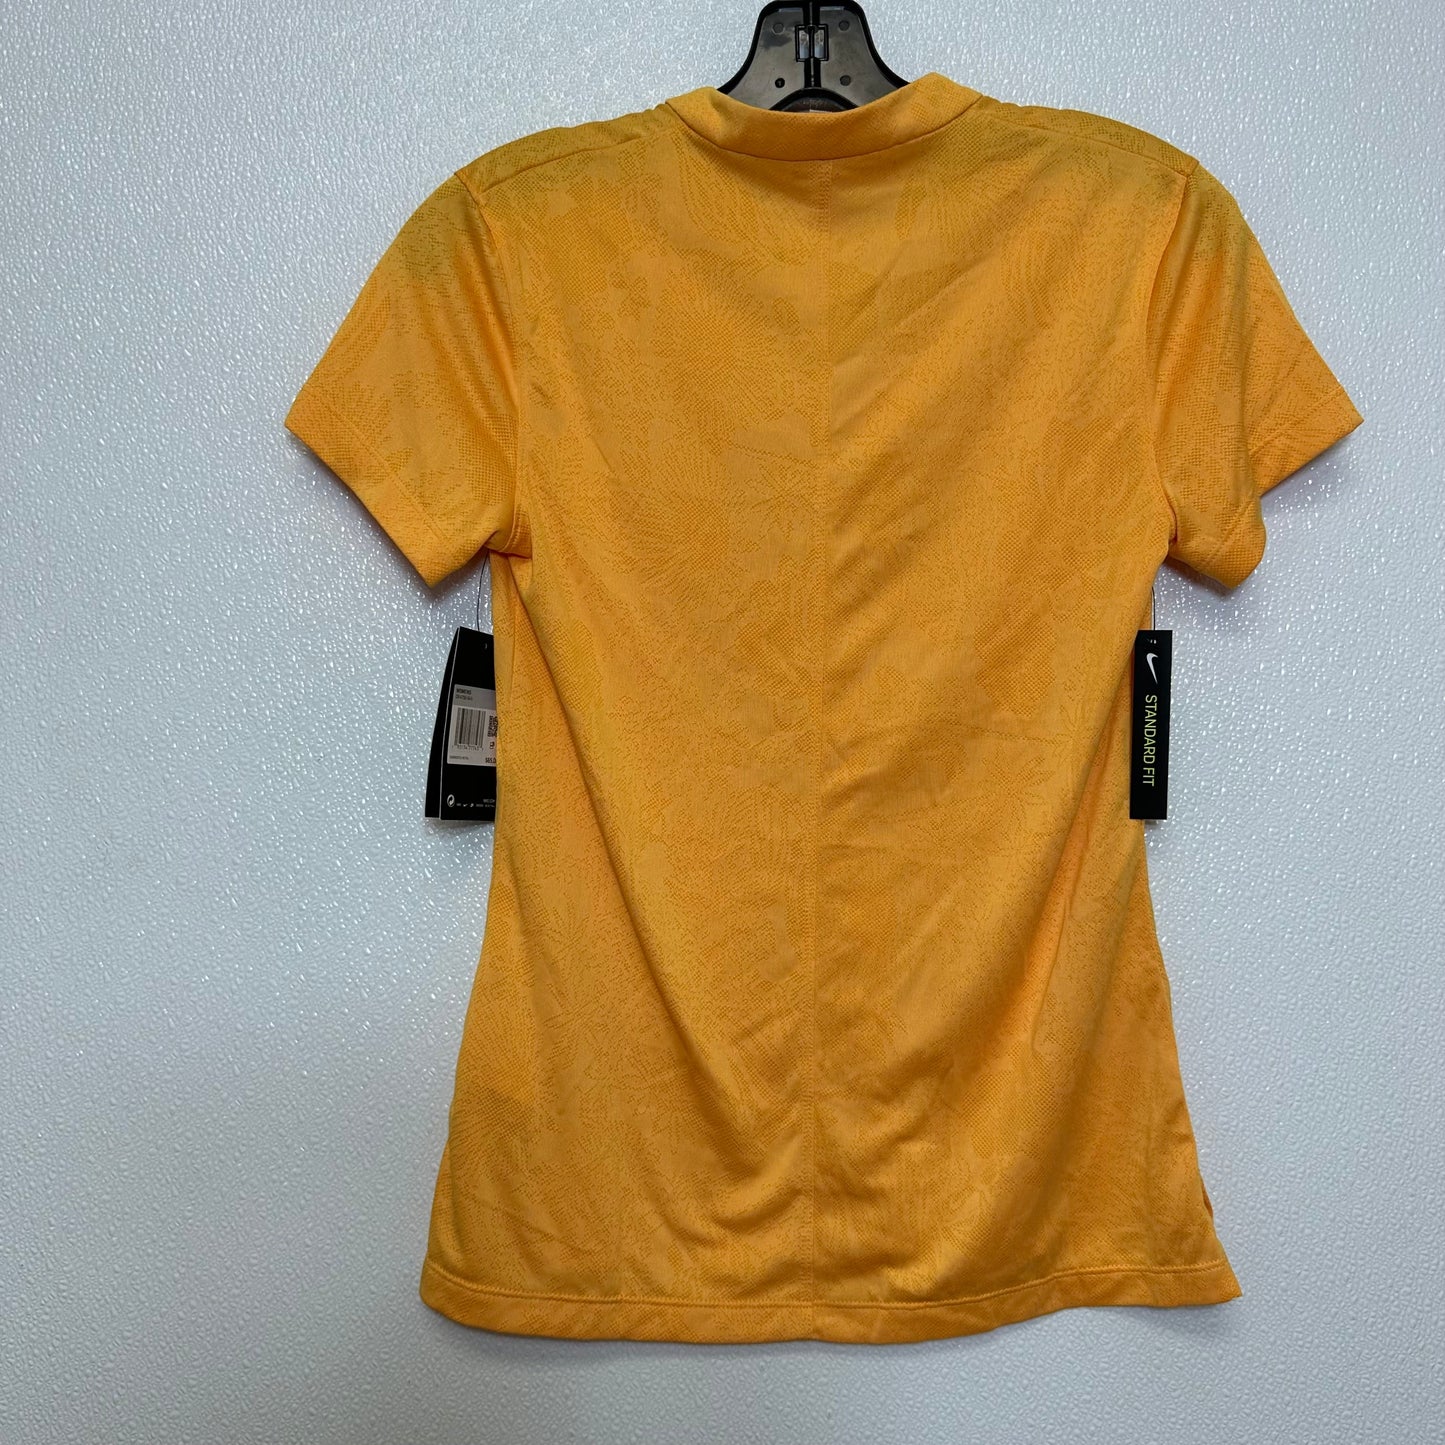 Athletic Top Short Sleeve By Nike  Size: Xs